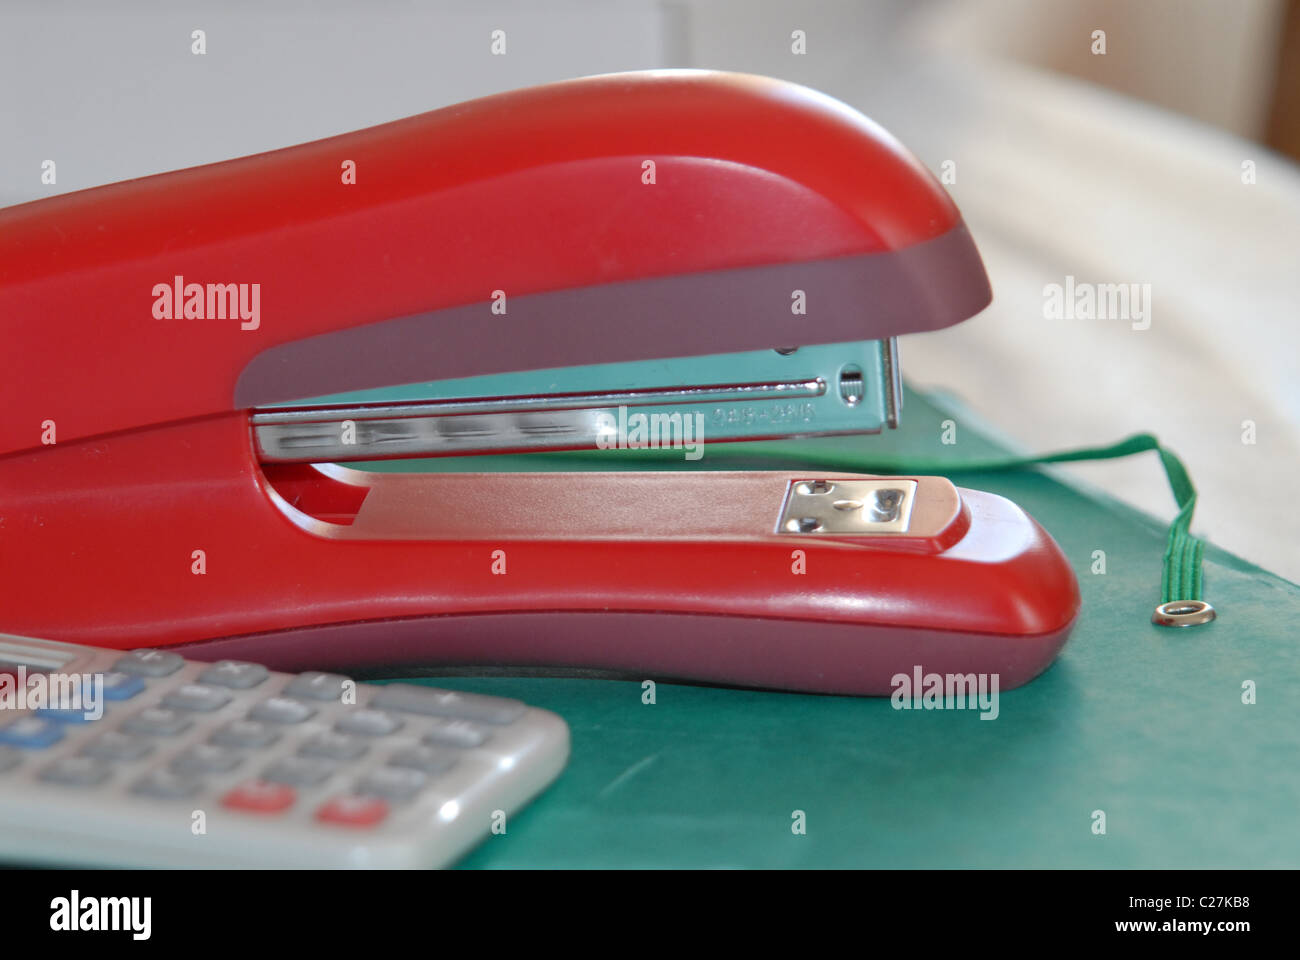 Red stapler, calculator and green file on an office desk. Stock Photo